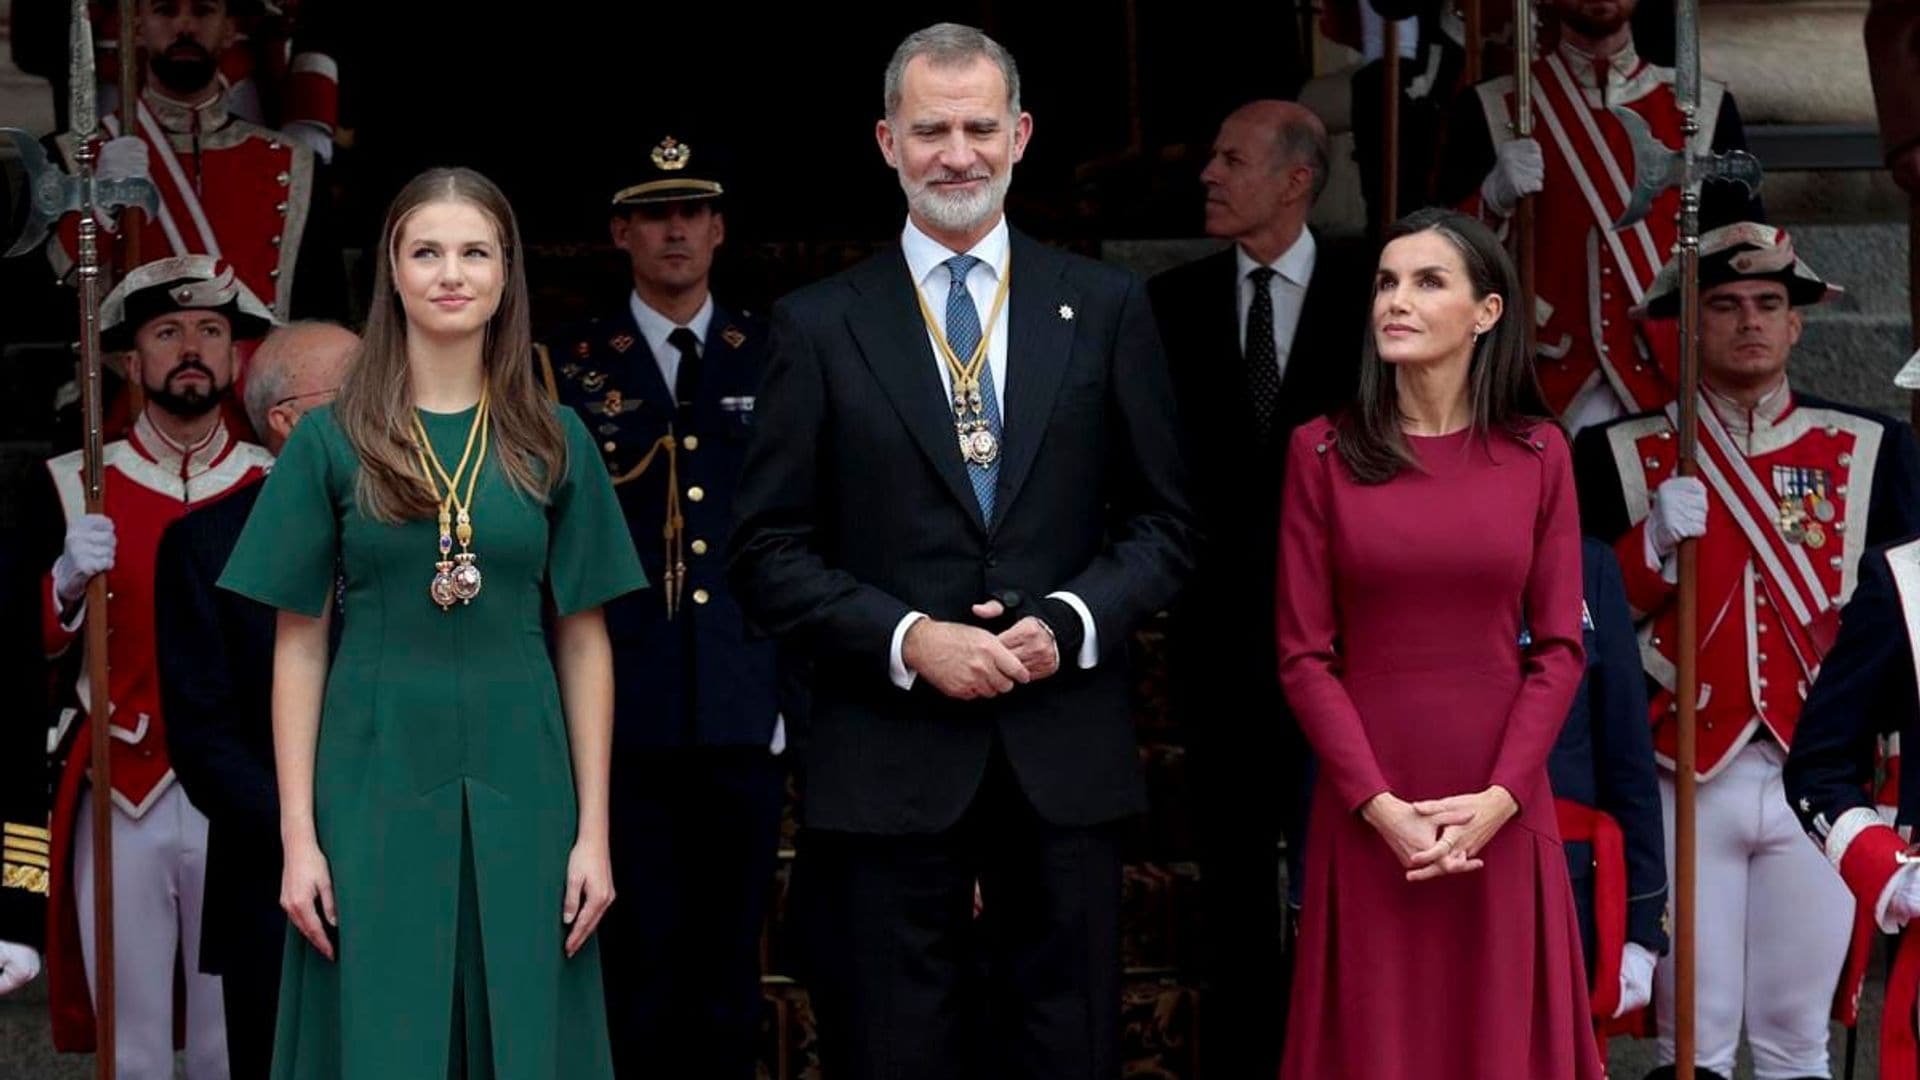 Queen Letizia and daughter Princess Leonor look holiday-ready in red and green dresses